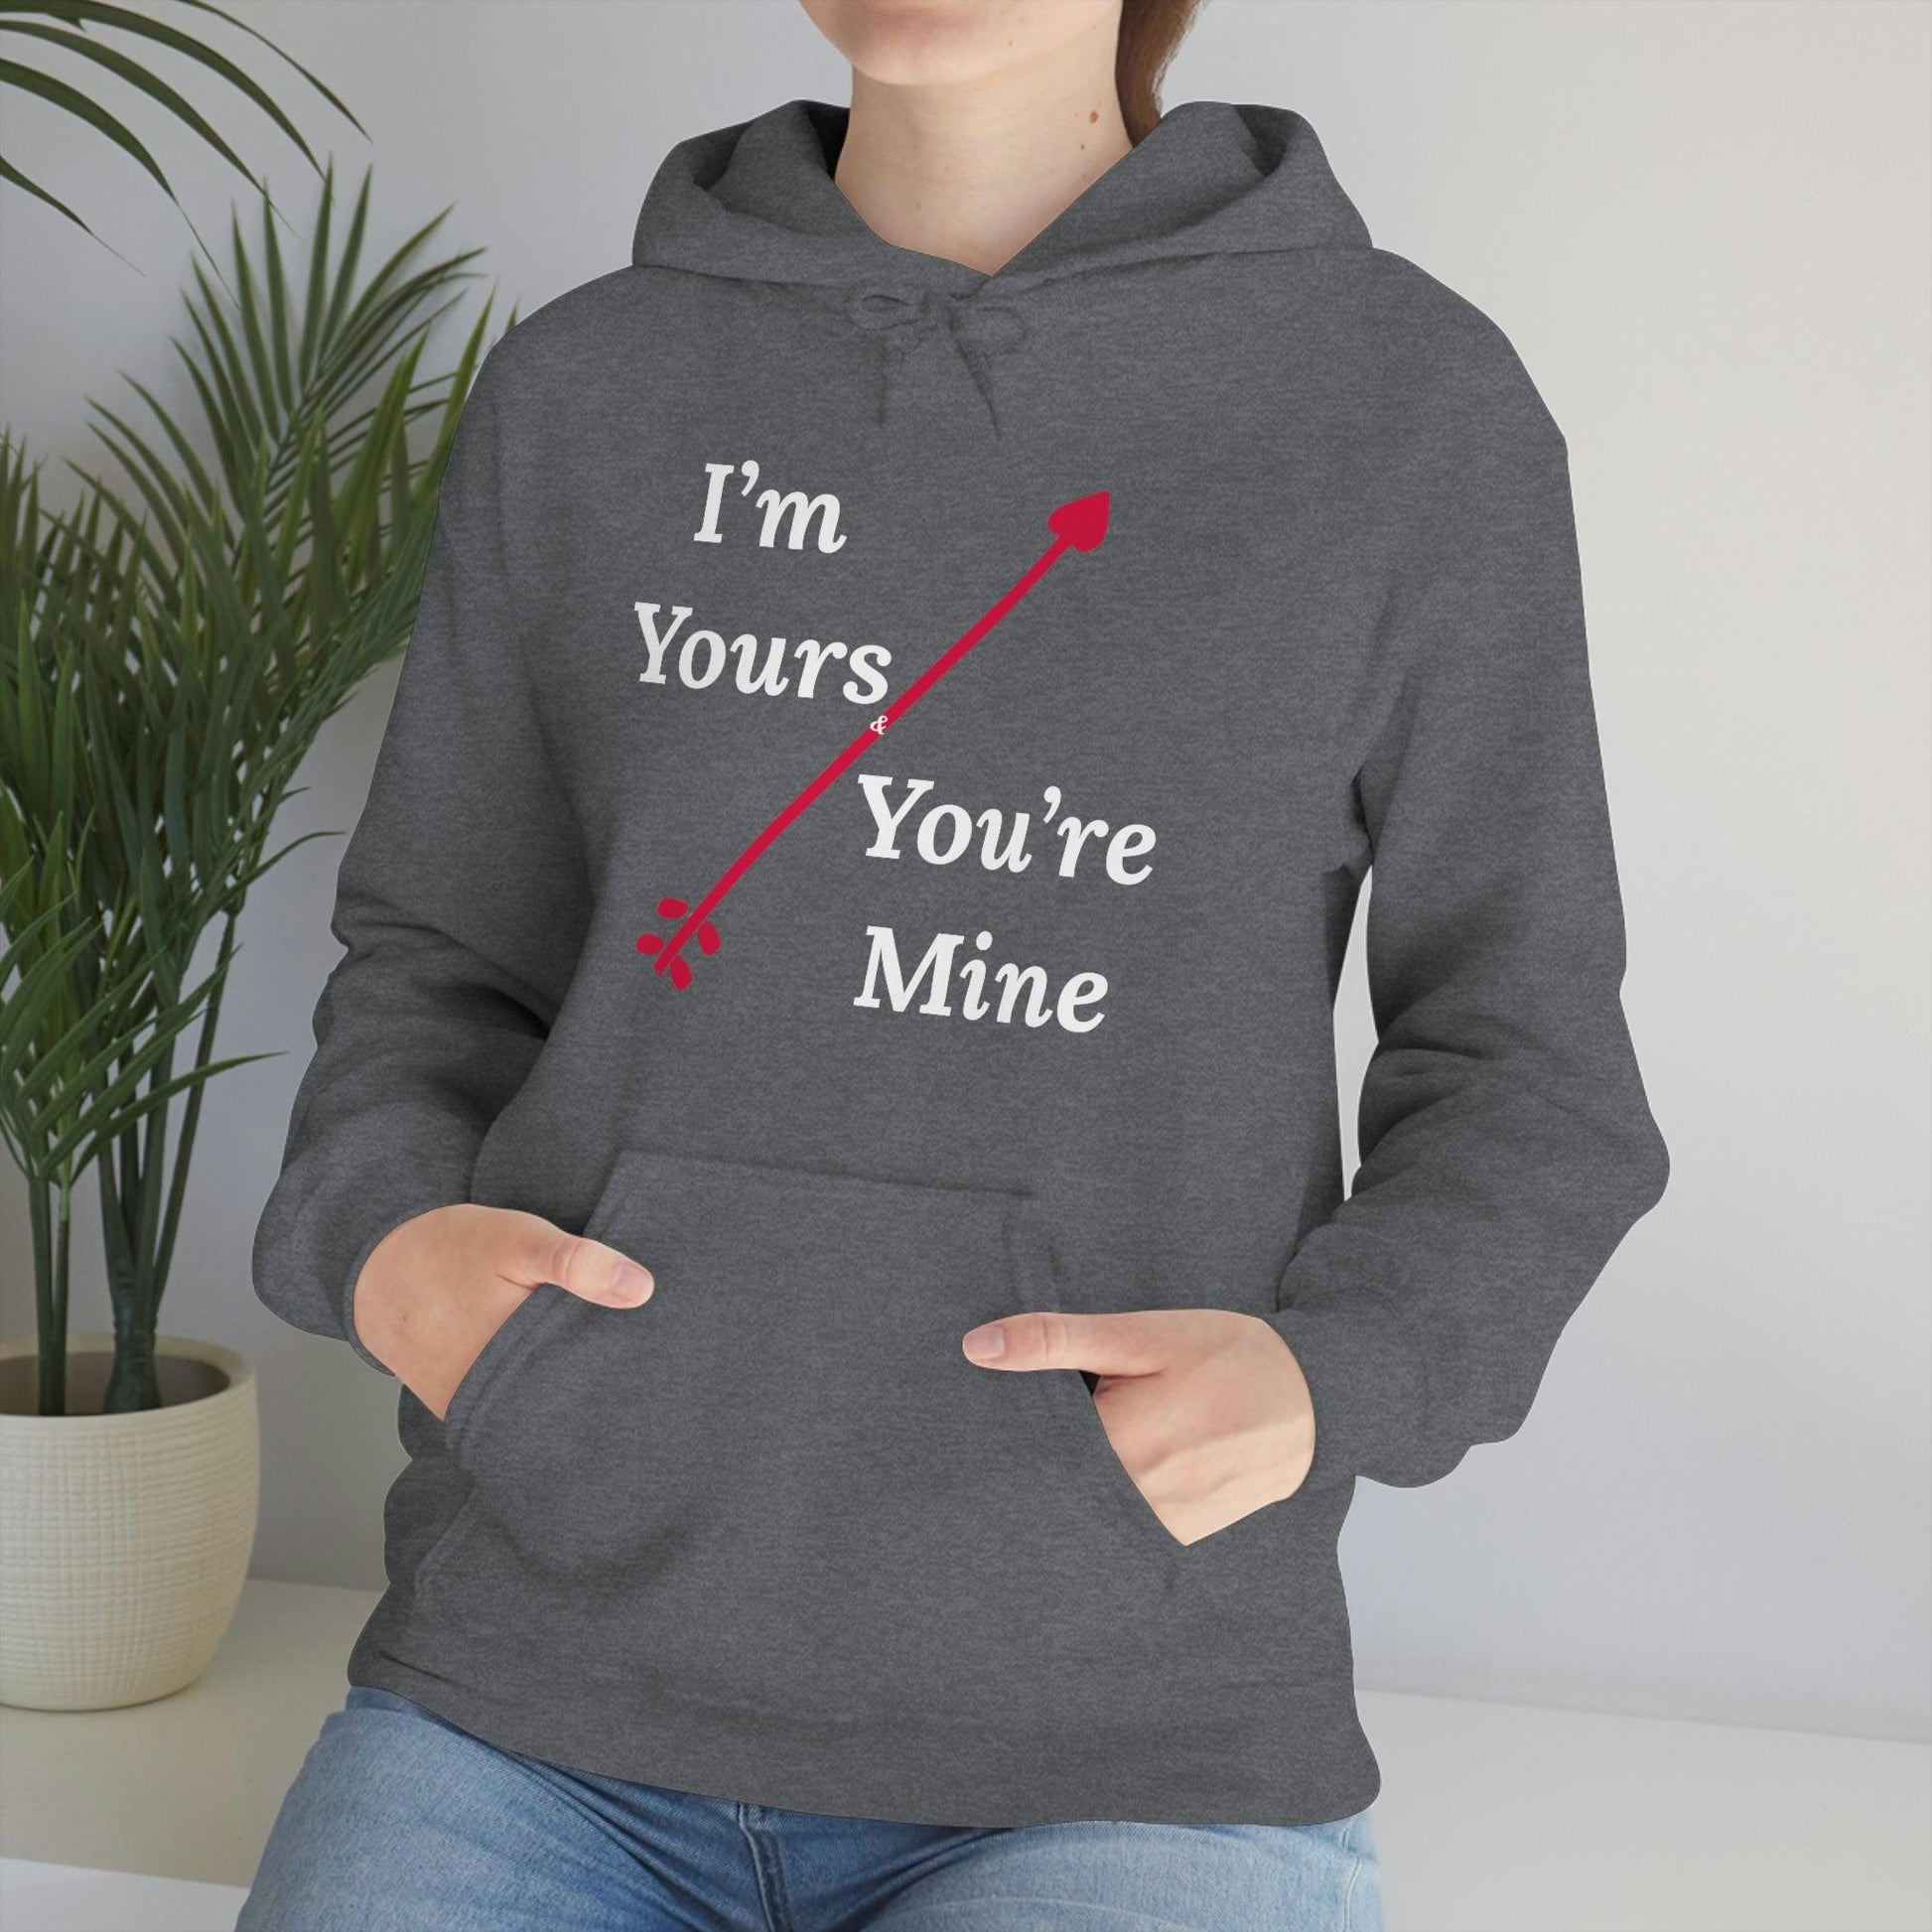 I'm Yours and You're Mine Hooded Sweatshirt - Giftsmojo